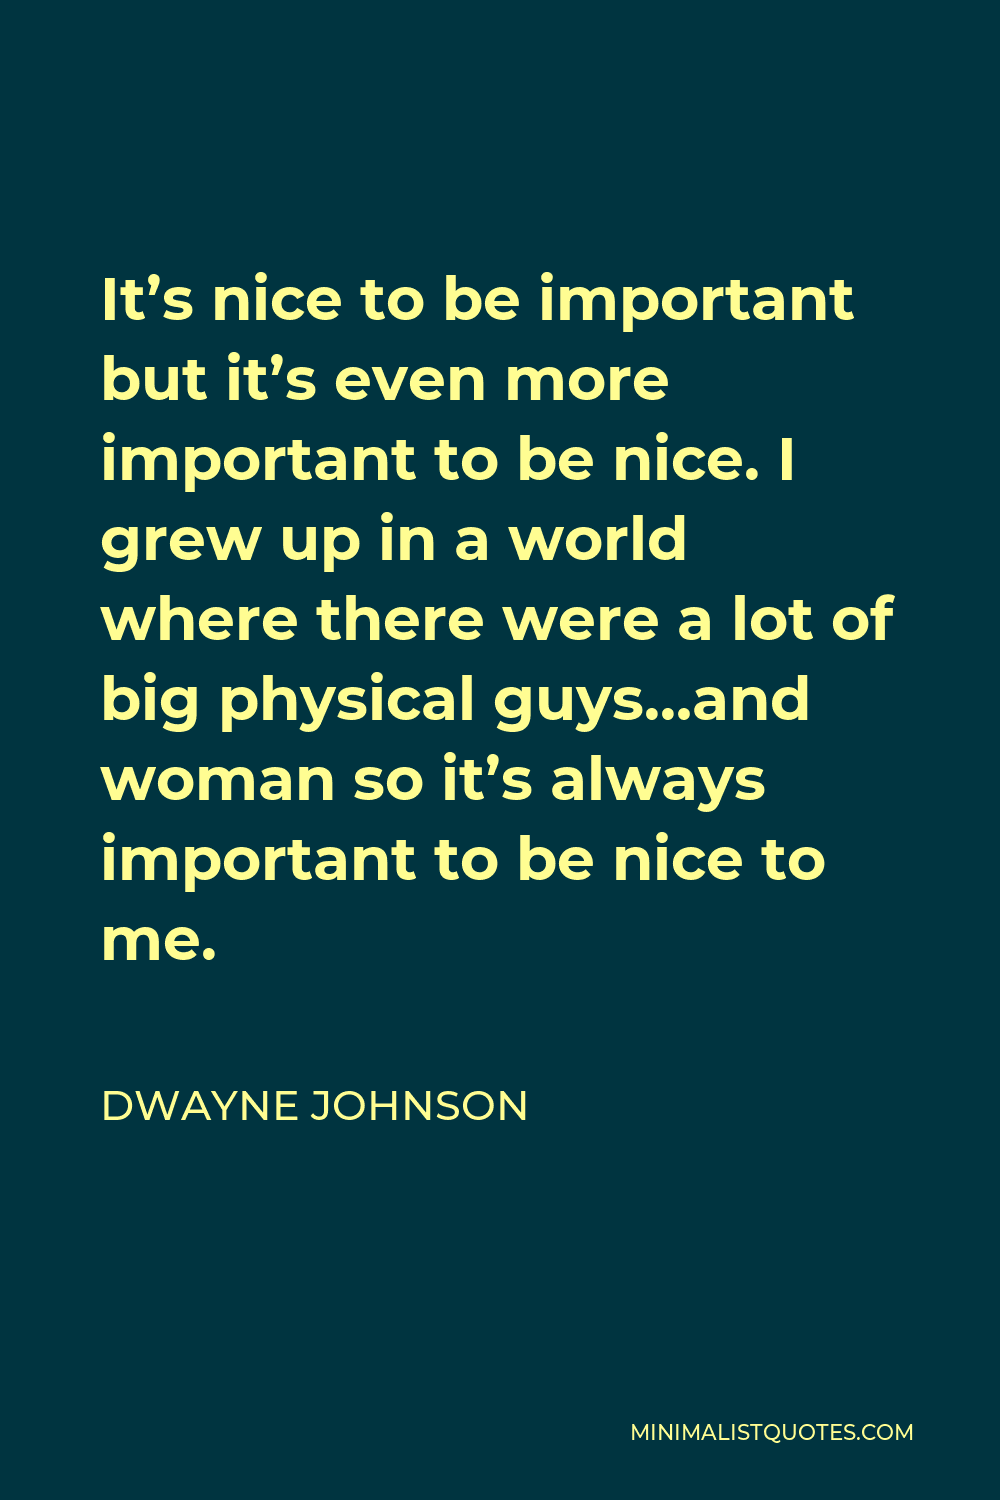 Dwayne Johnson Quote - It’s nice to be important but it’s even more important to be nice. I grew up in a world where there were a lot of big physical guys…and woman so it’s always important to be nice to me.